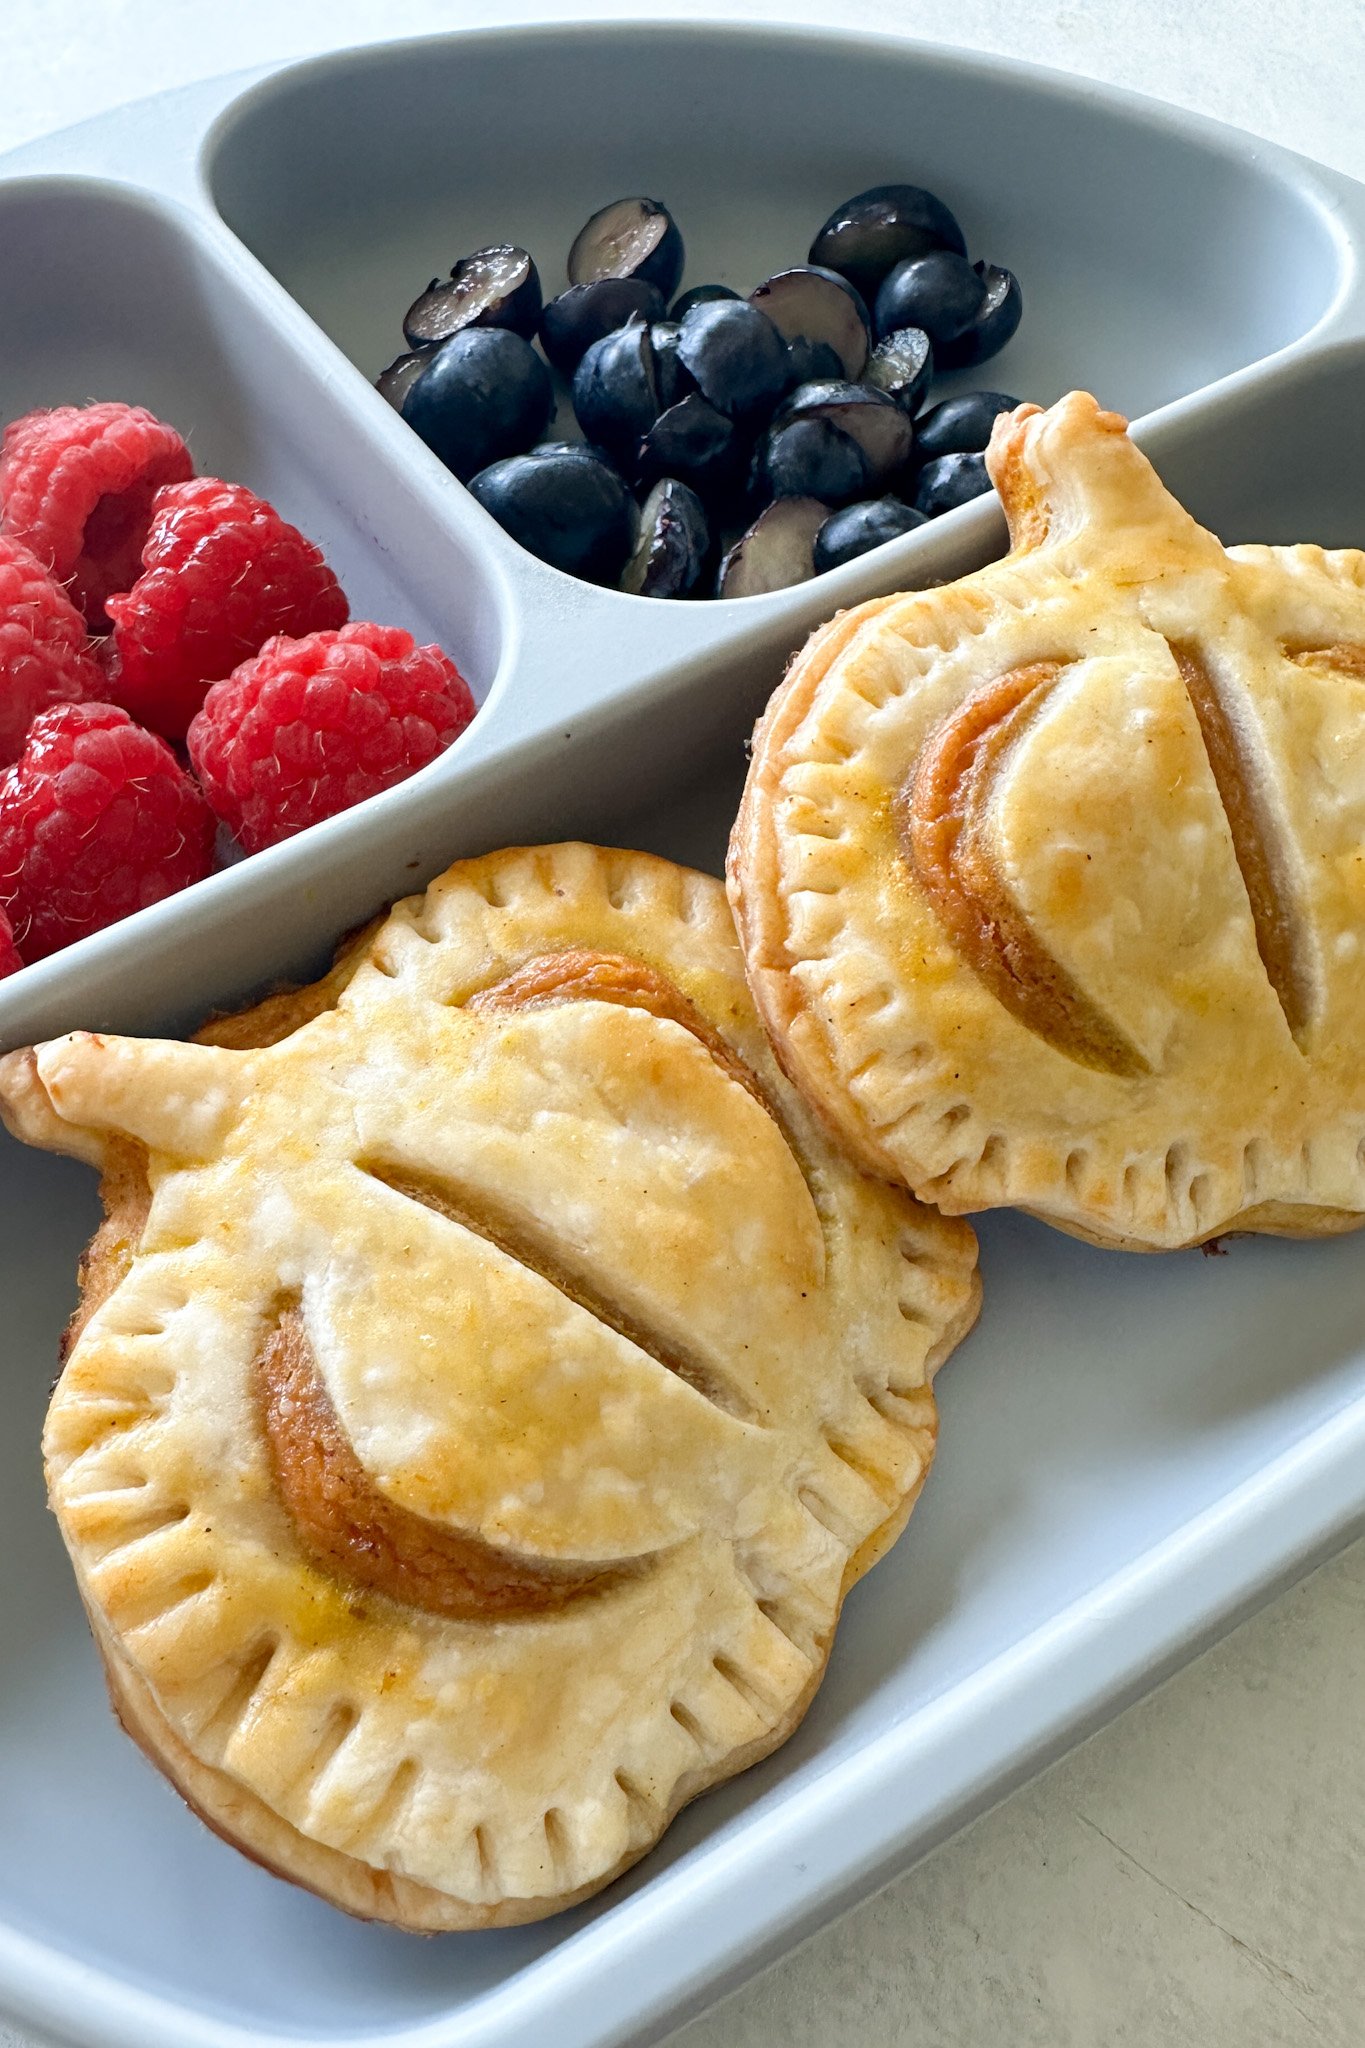 Pumpkin hand pies served with fruits.